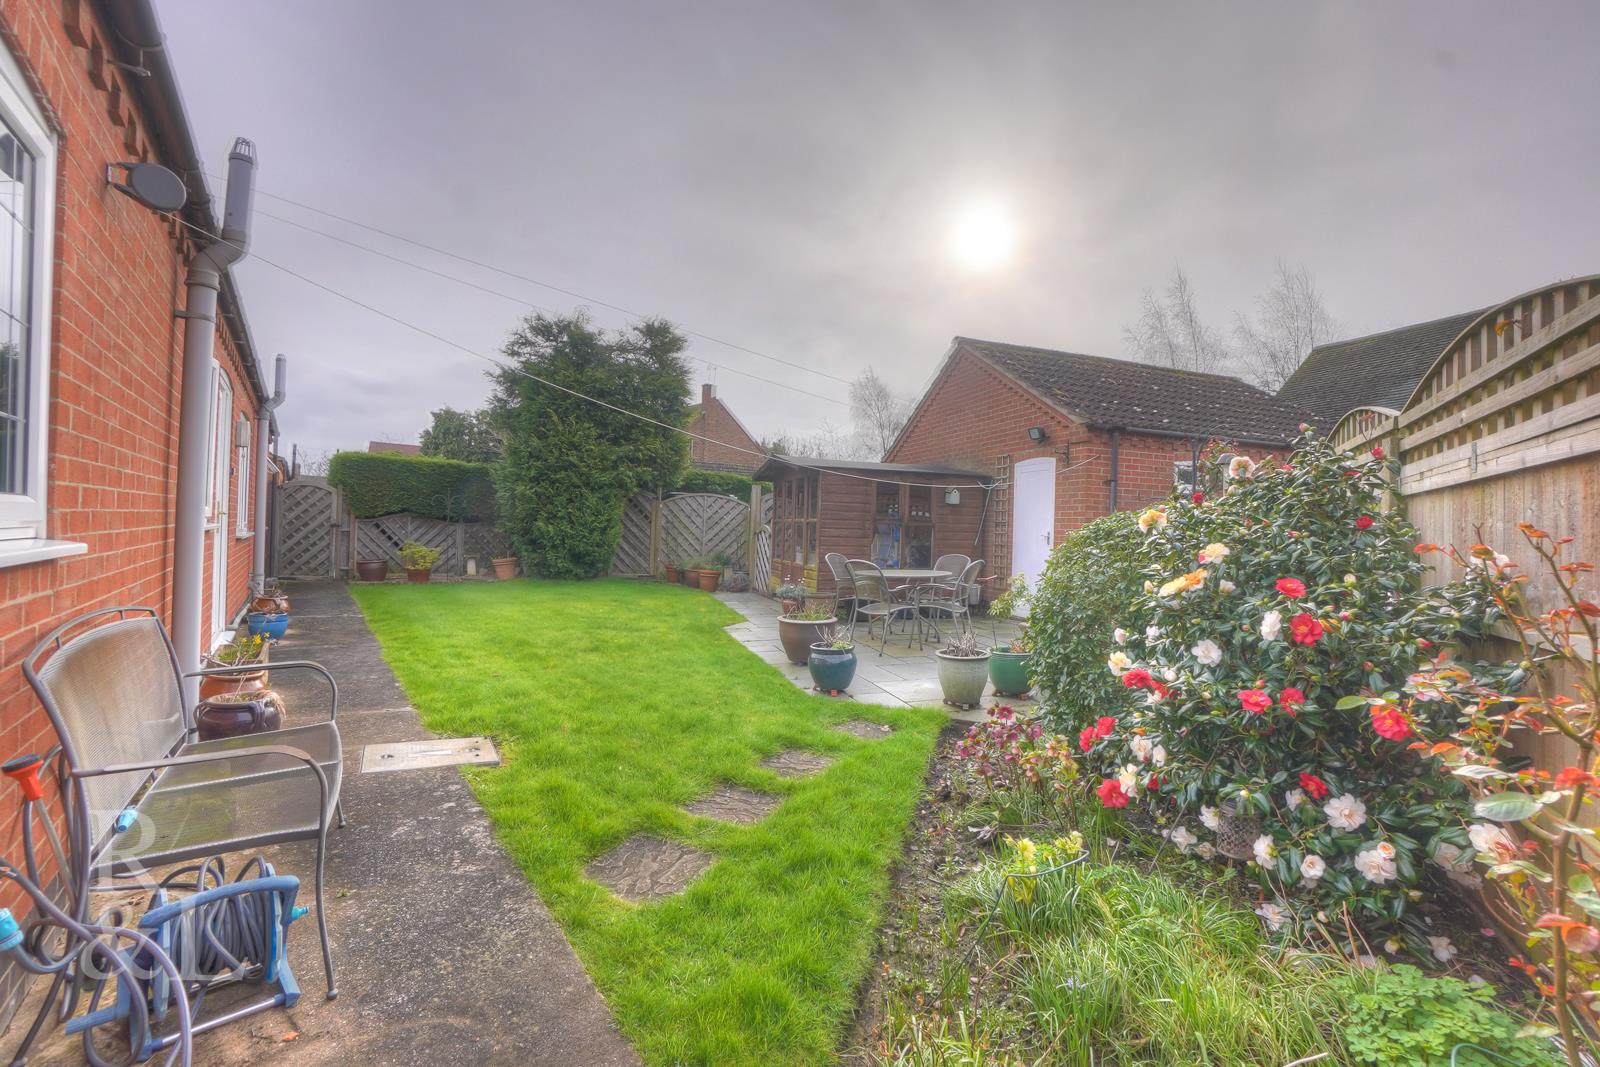 Property image for Widmerpool Road, Wysall, Nottingham